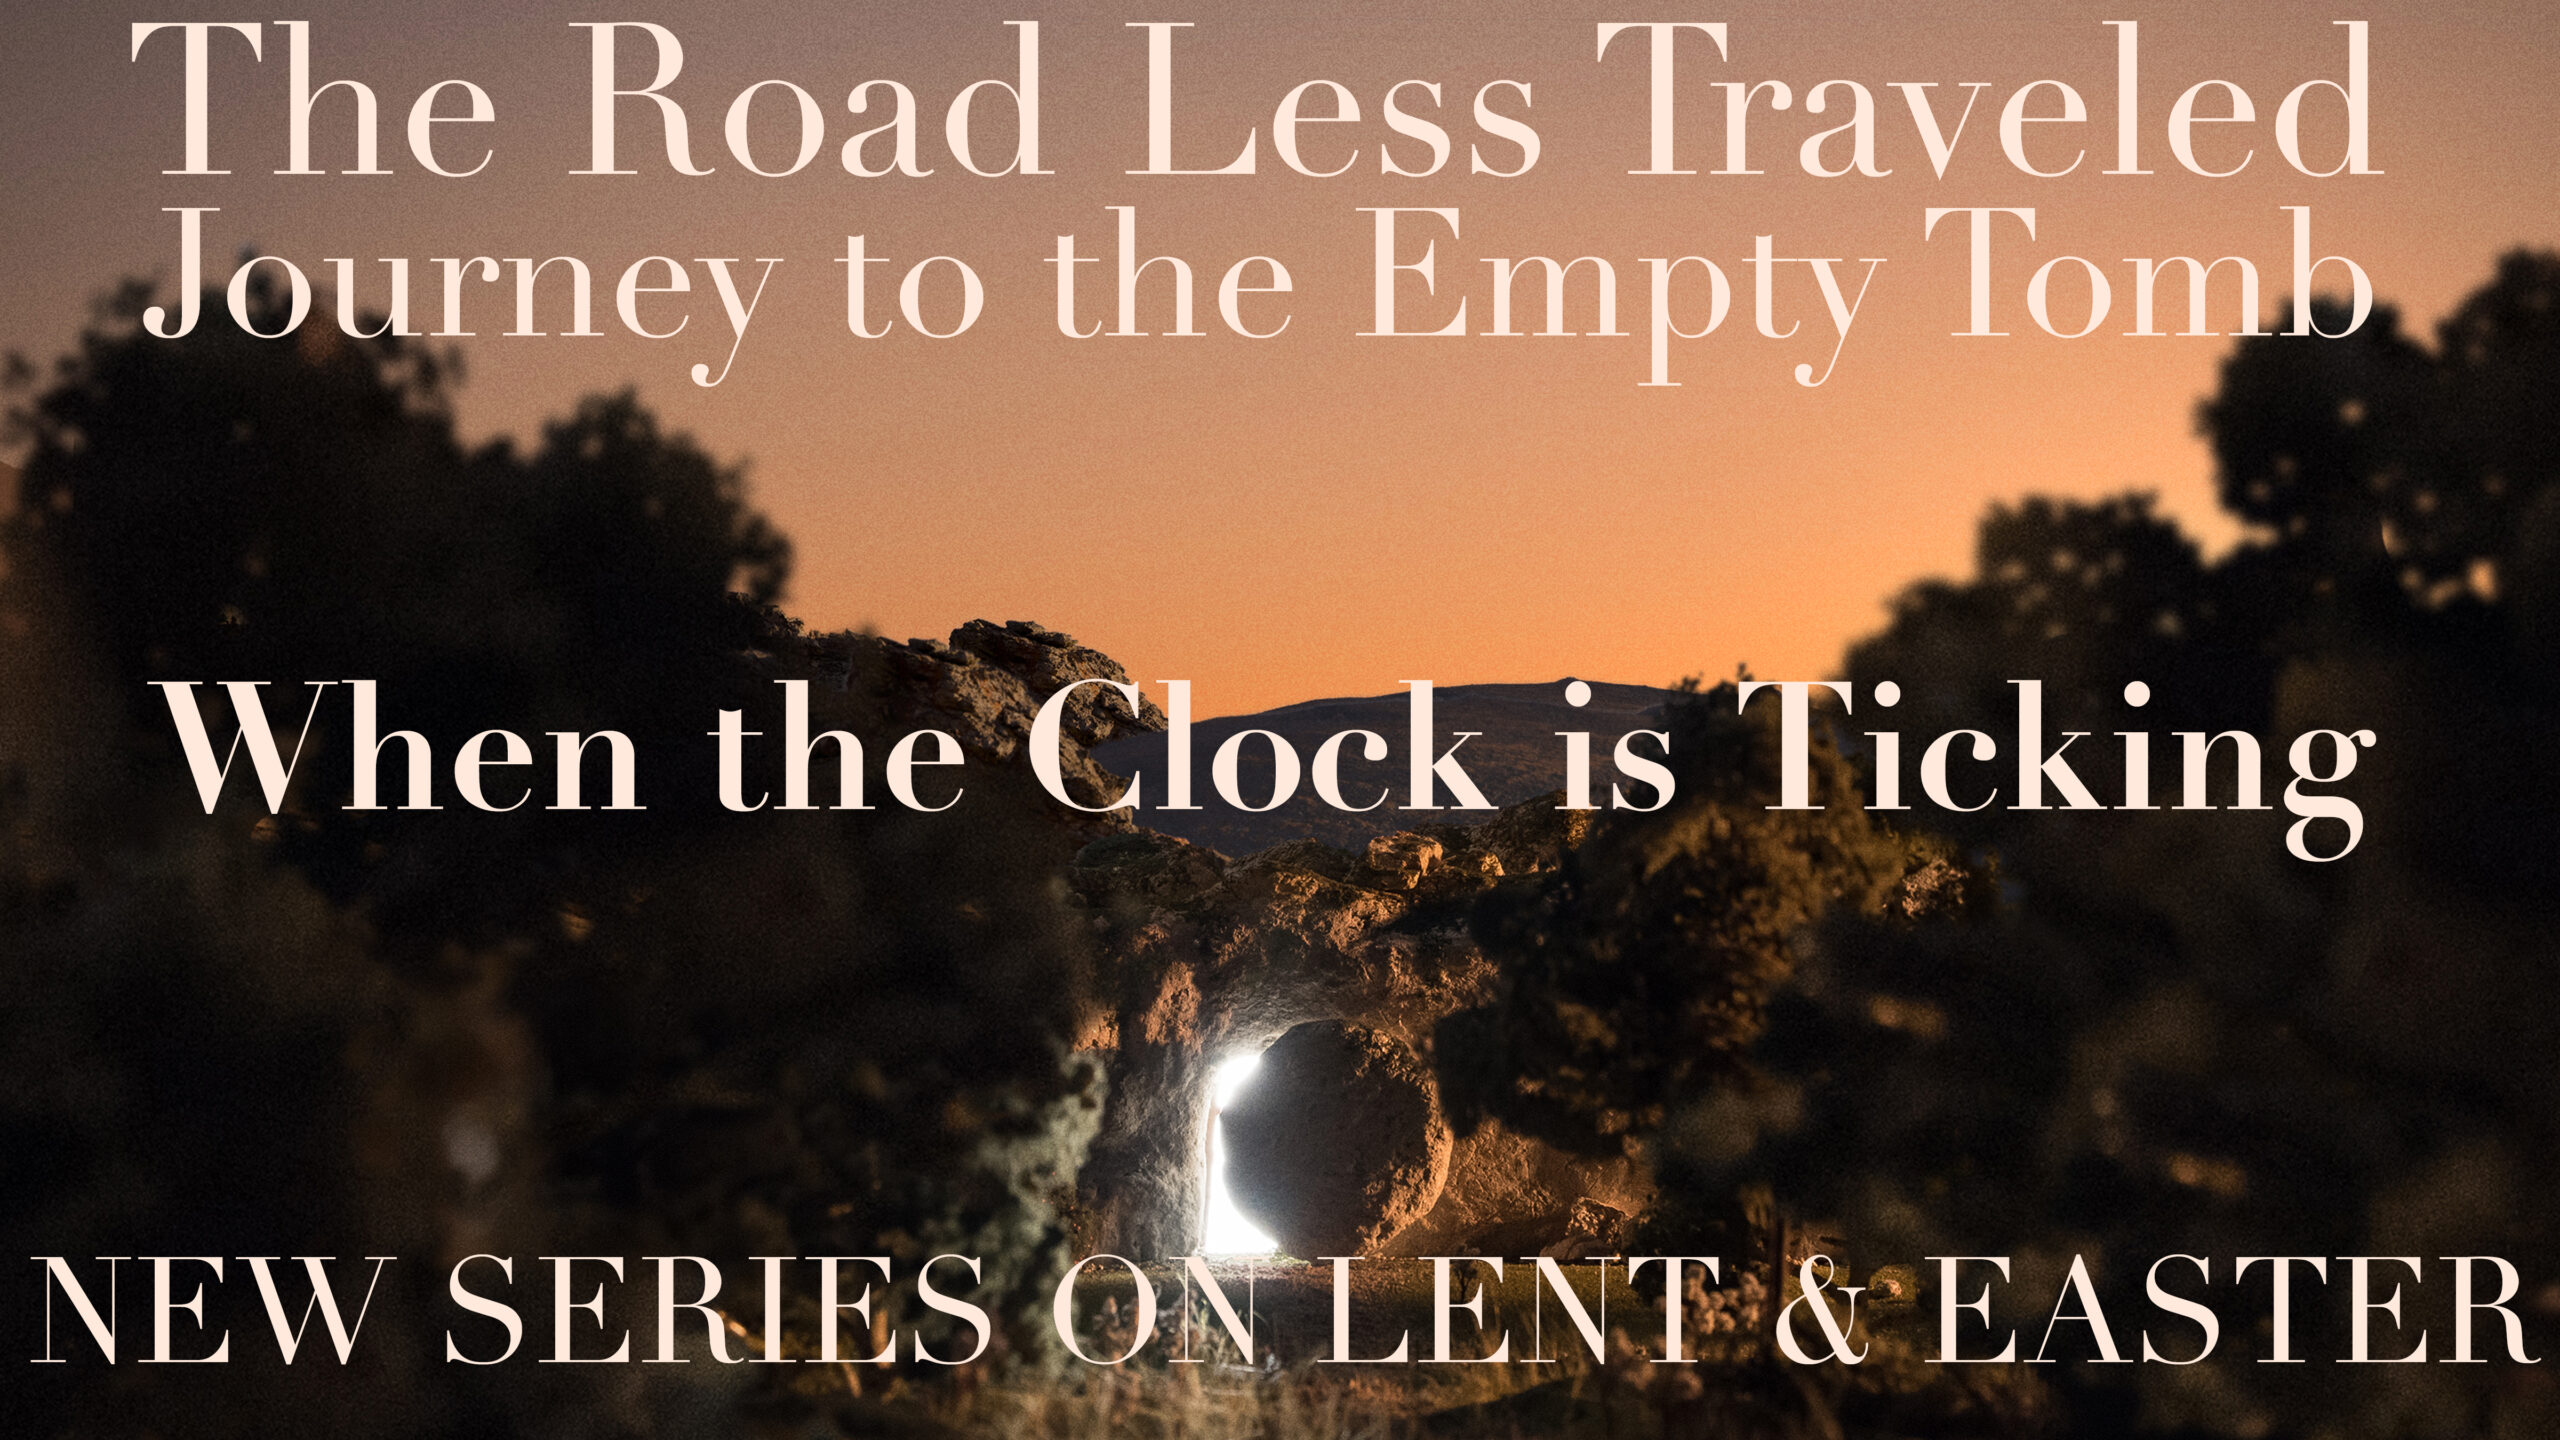 The Road Less Traveled - Journey to the Empty Tomb - Part 1 "When the Clock is Ticking" (THRIVE)